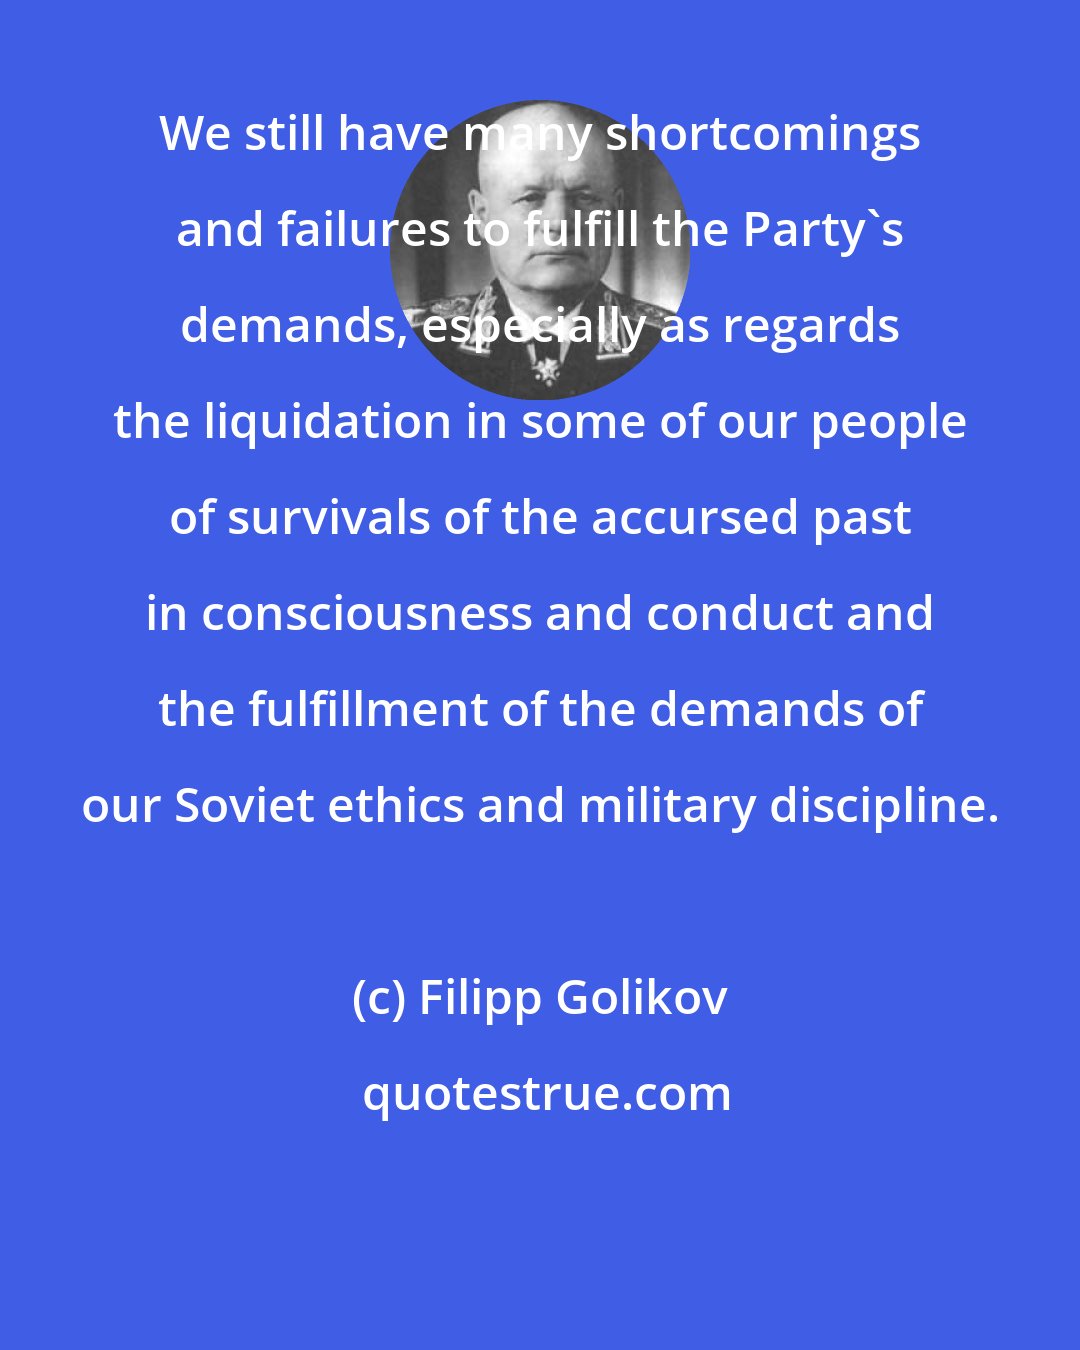 Filipp Golikov: We still have many shortcomings and failures to fulfill the Party's demands, especially as regards the liquidation in some of our people of survivals of the accursed past in consciousness and conduct and the fulfillment of the demands of our Soviet ethics and military discipline.